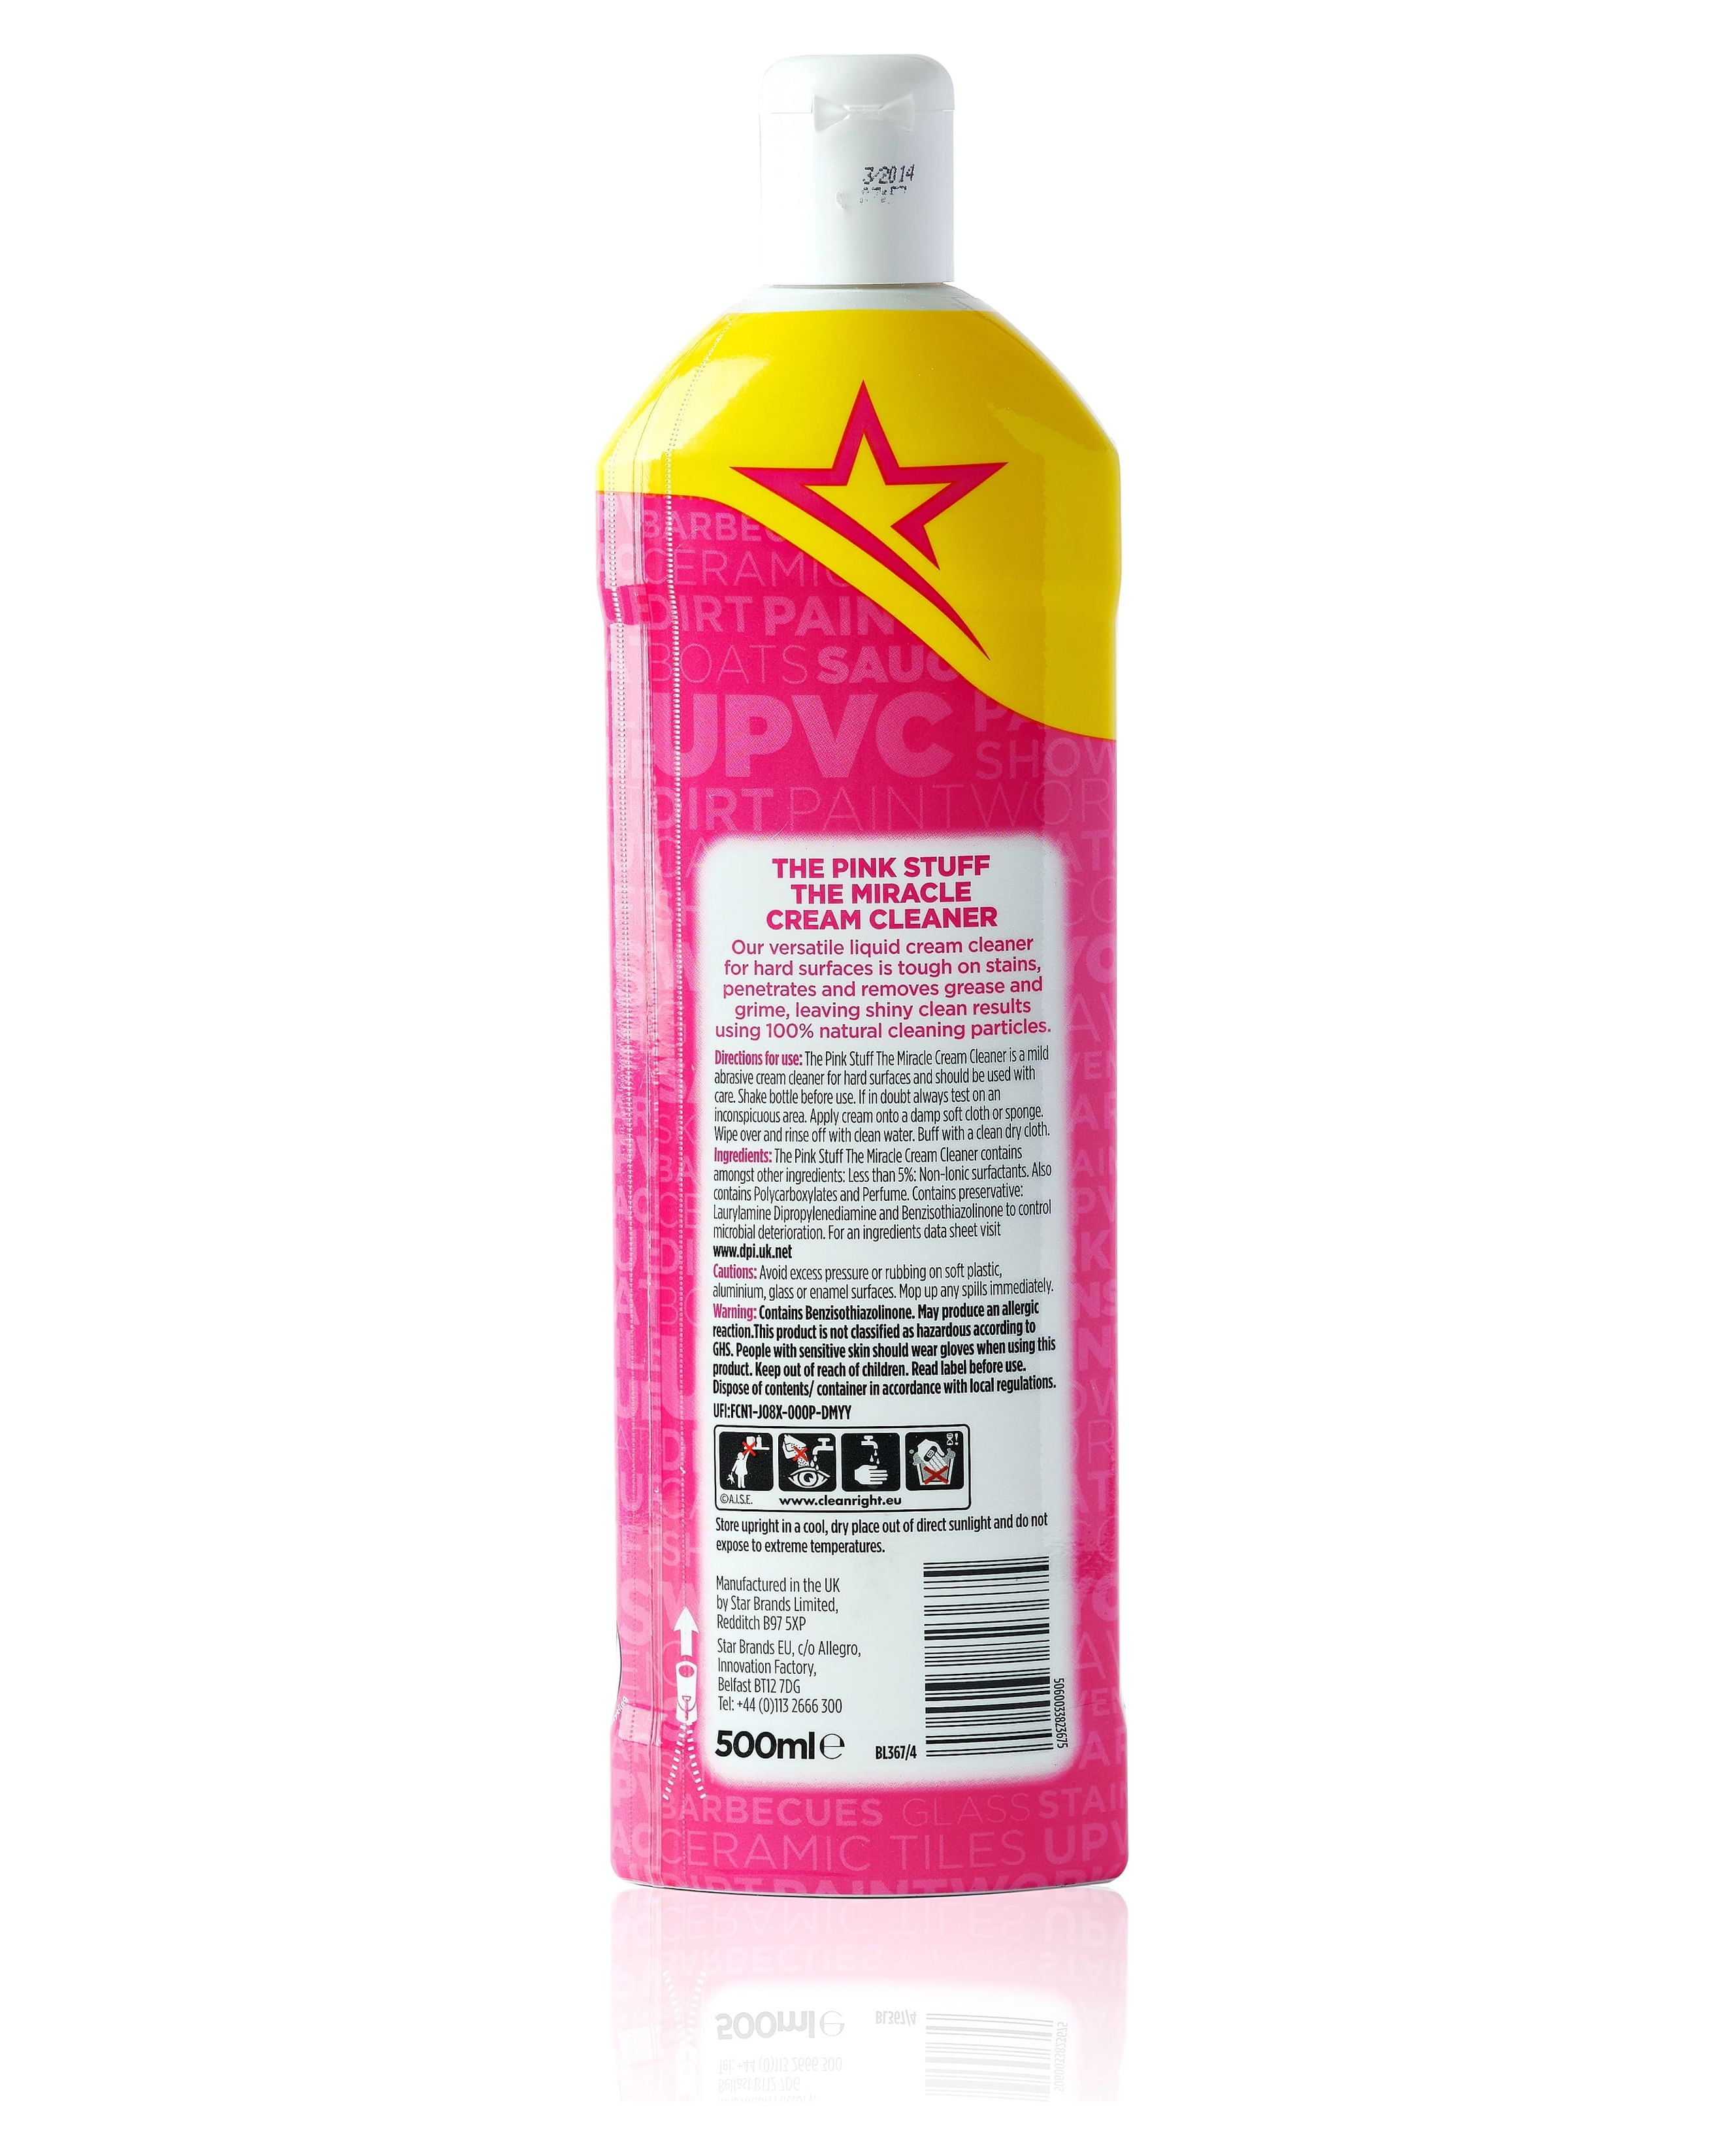 The Pink Stuff Miracle Cream Cleaner, 17.6 fl. oz. 